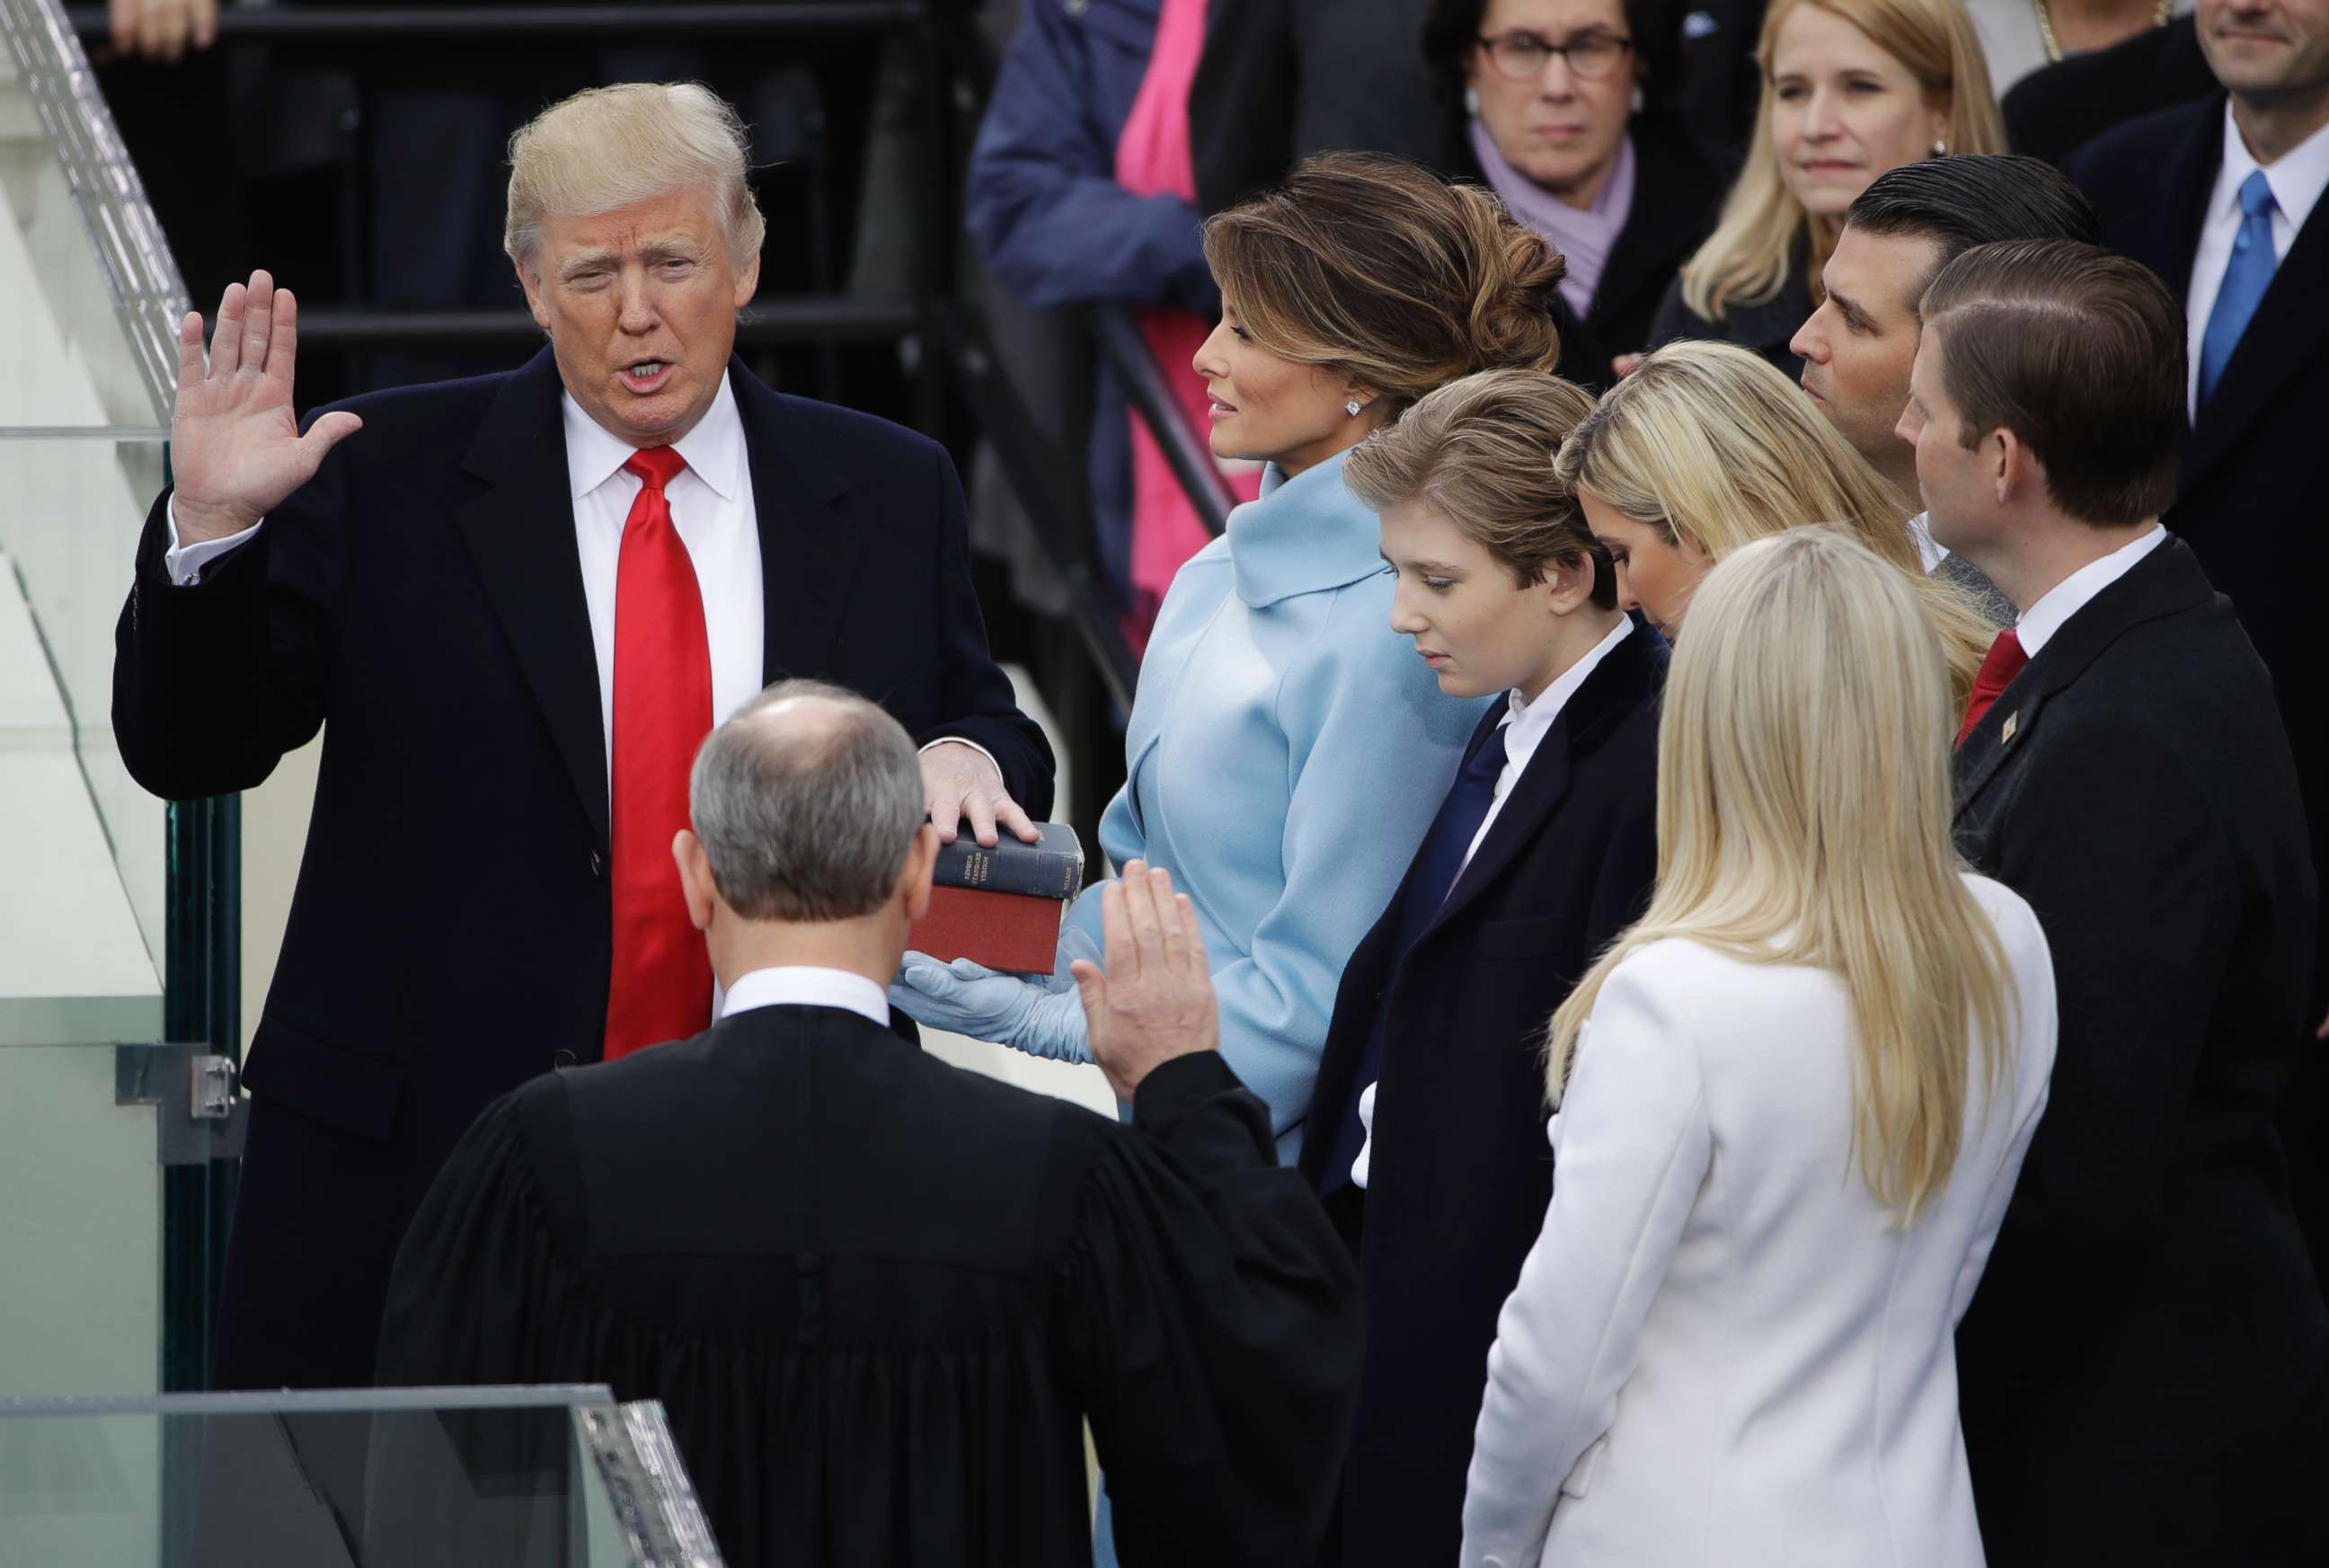 PHOTO: Donald Trump is sworn in as the 45th president of the United States by Chief Justice John Roberts as Melania Trump looks on during the 58th Presidential Inauguration at the U.S. Capitol in Washington, Jan. 20, 2017.